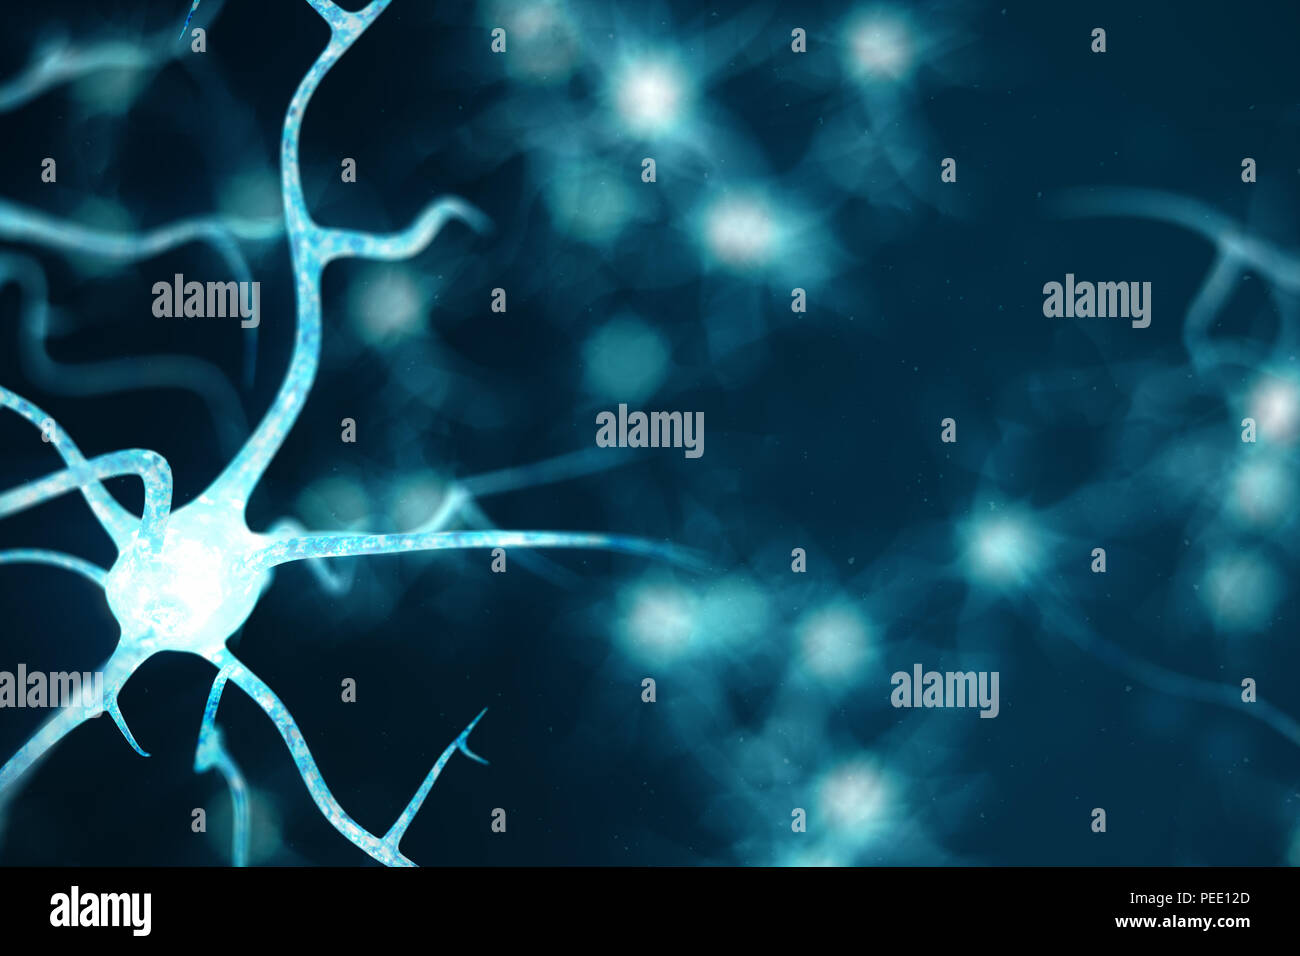 Synapse With Neurons In The Background Stock Photo - Download